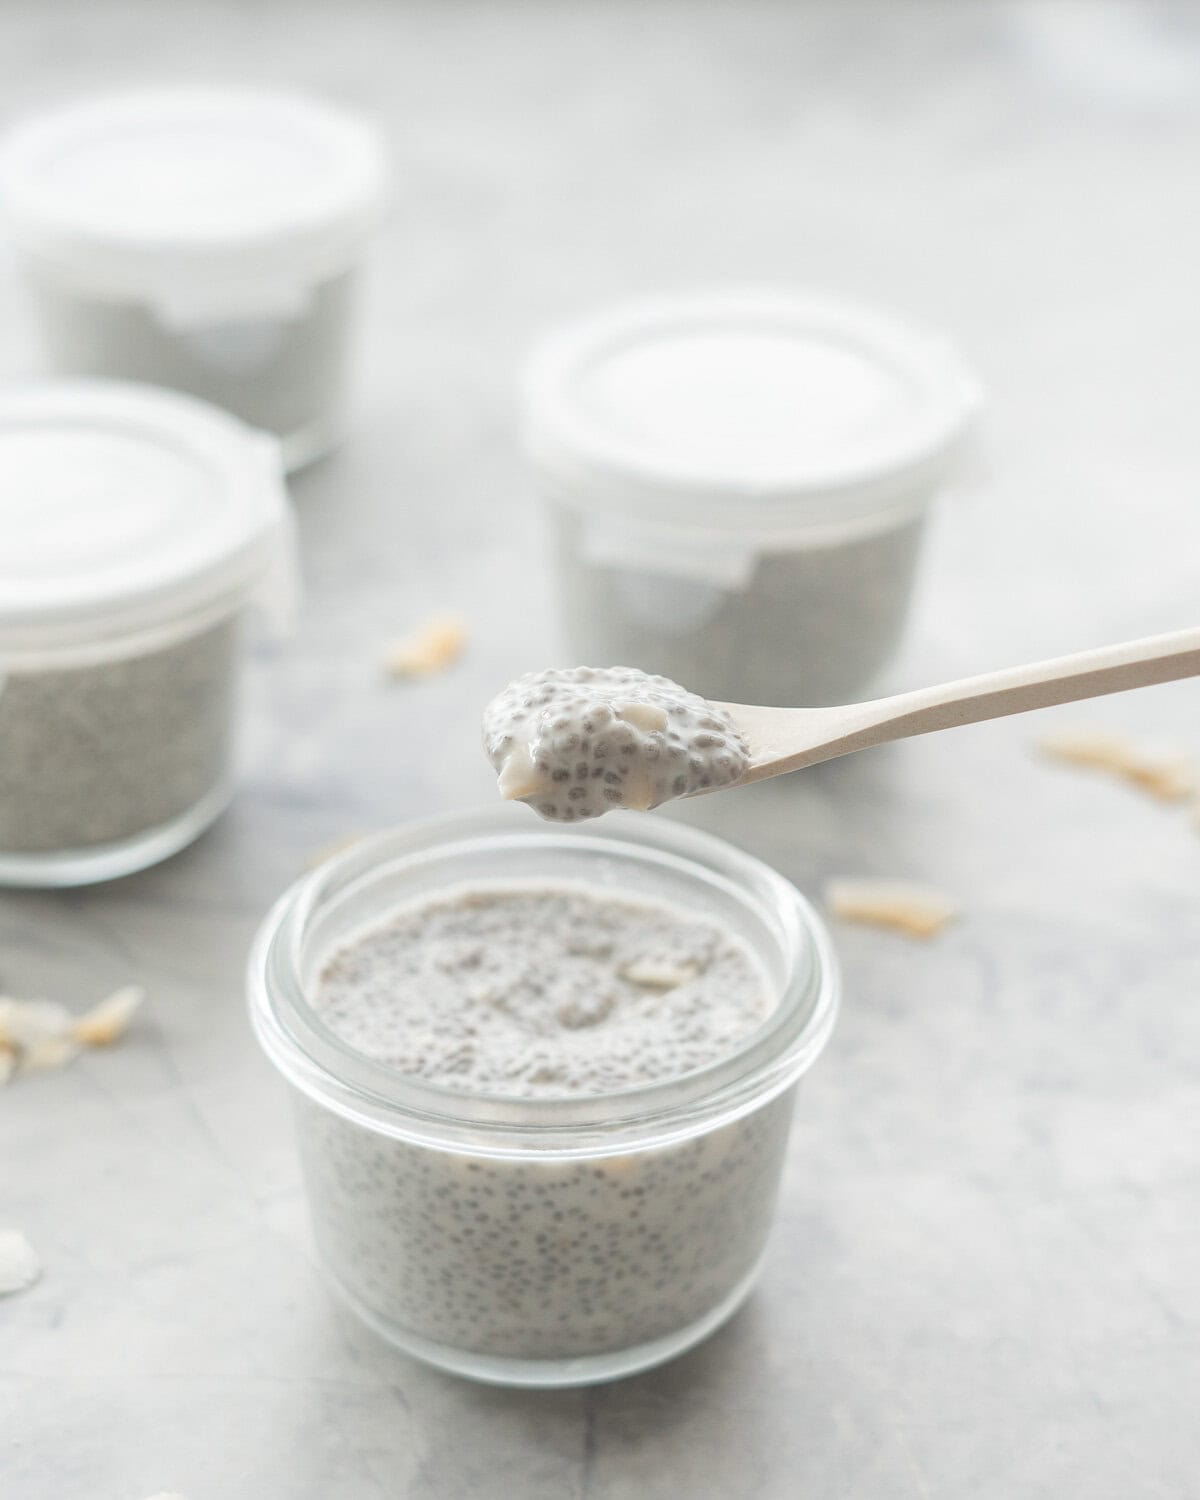 A spoonful of coconut and chia pudding above of small glass container filled with pudding.